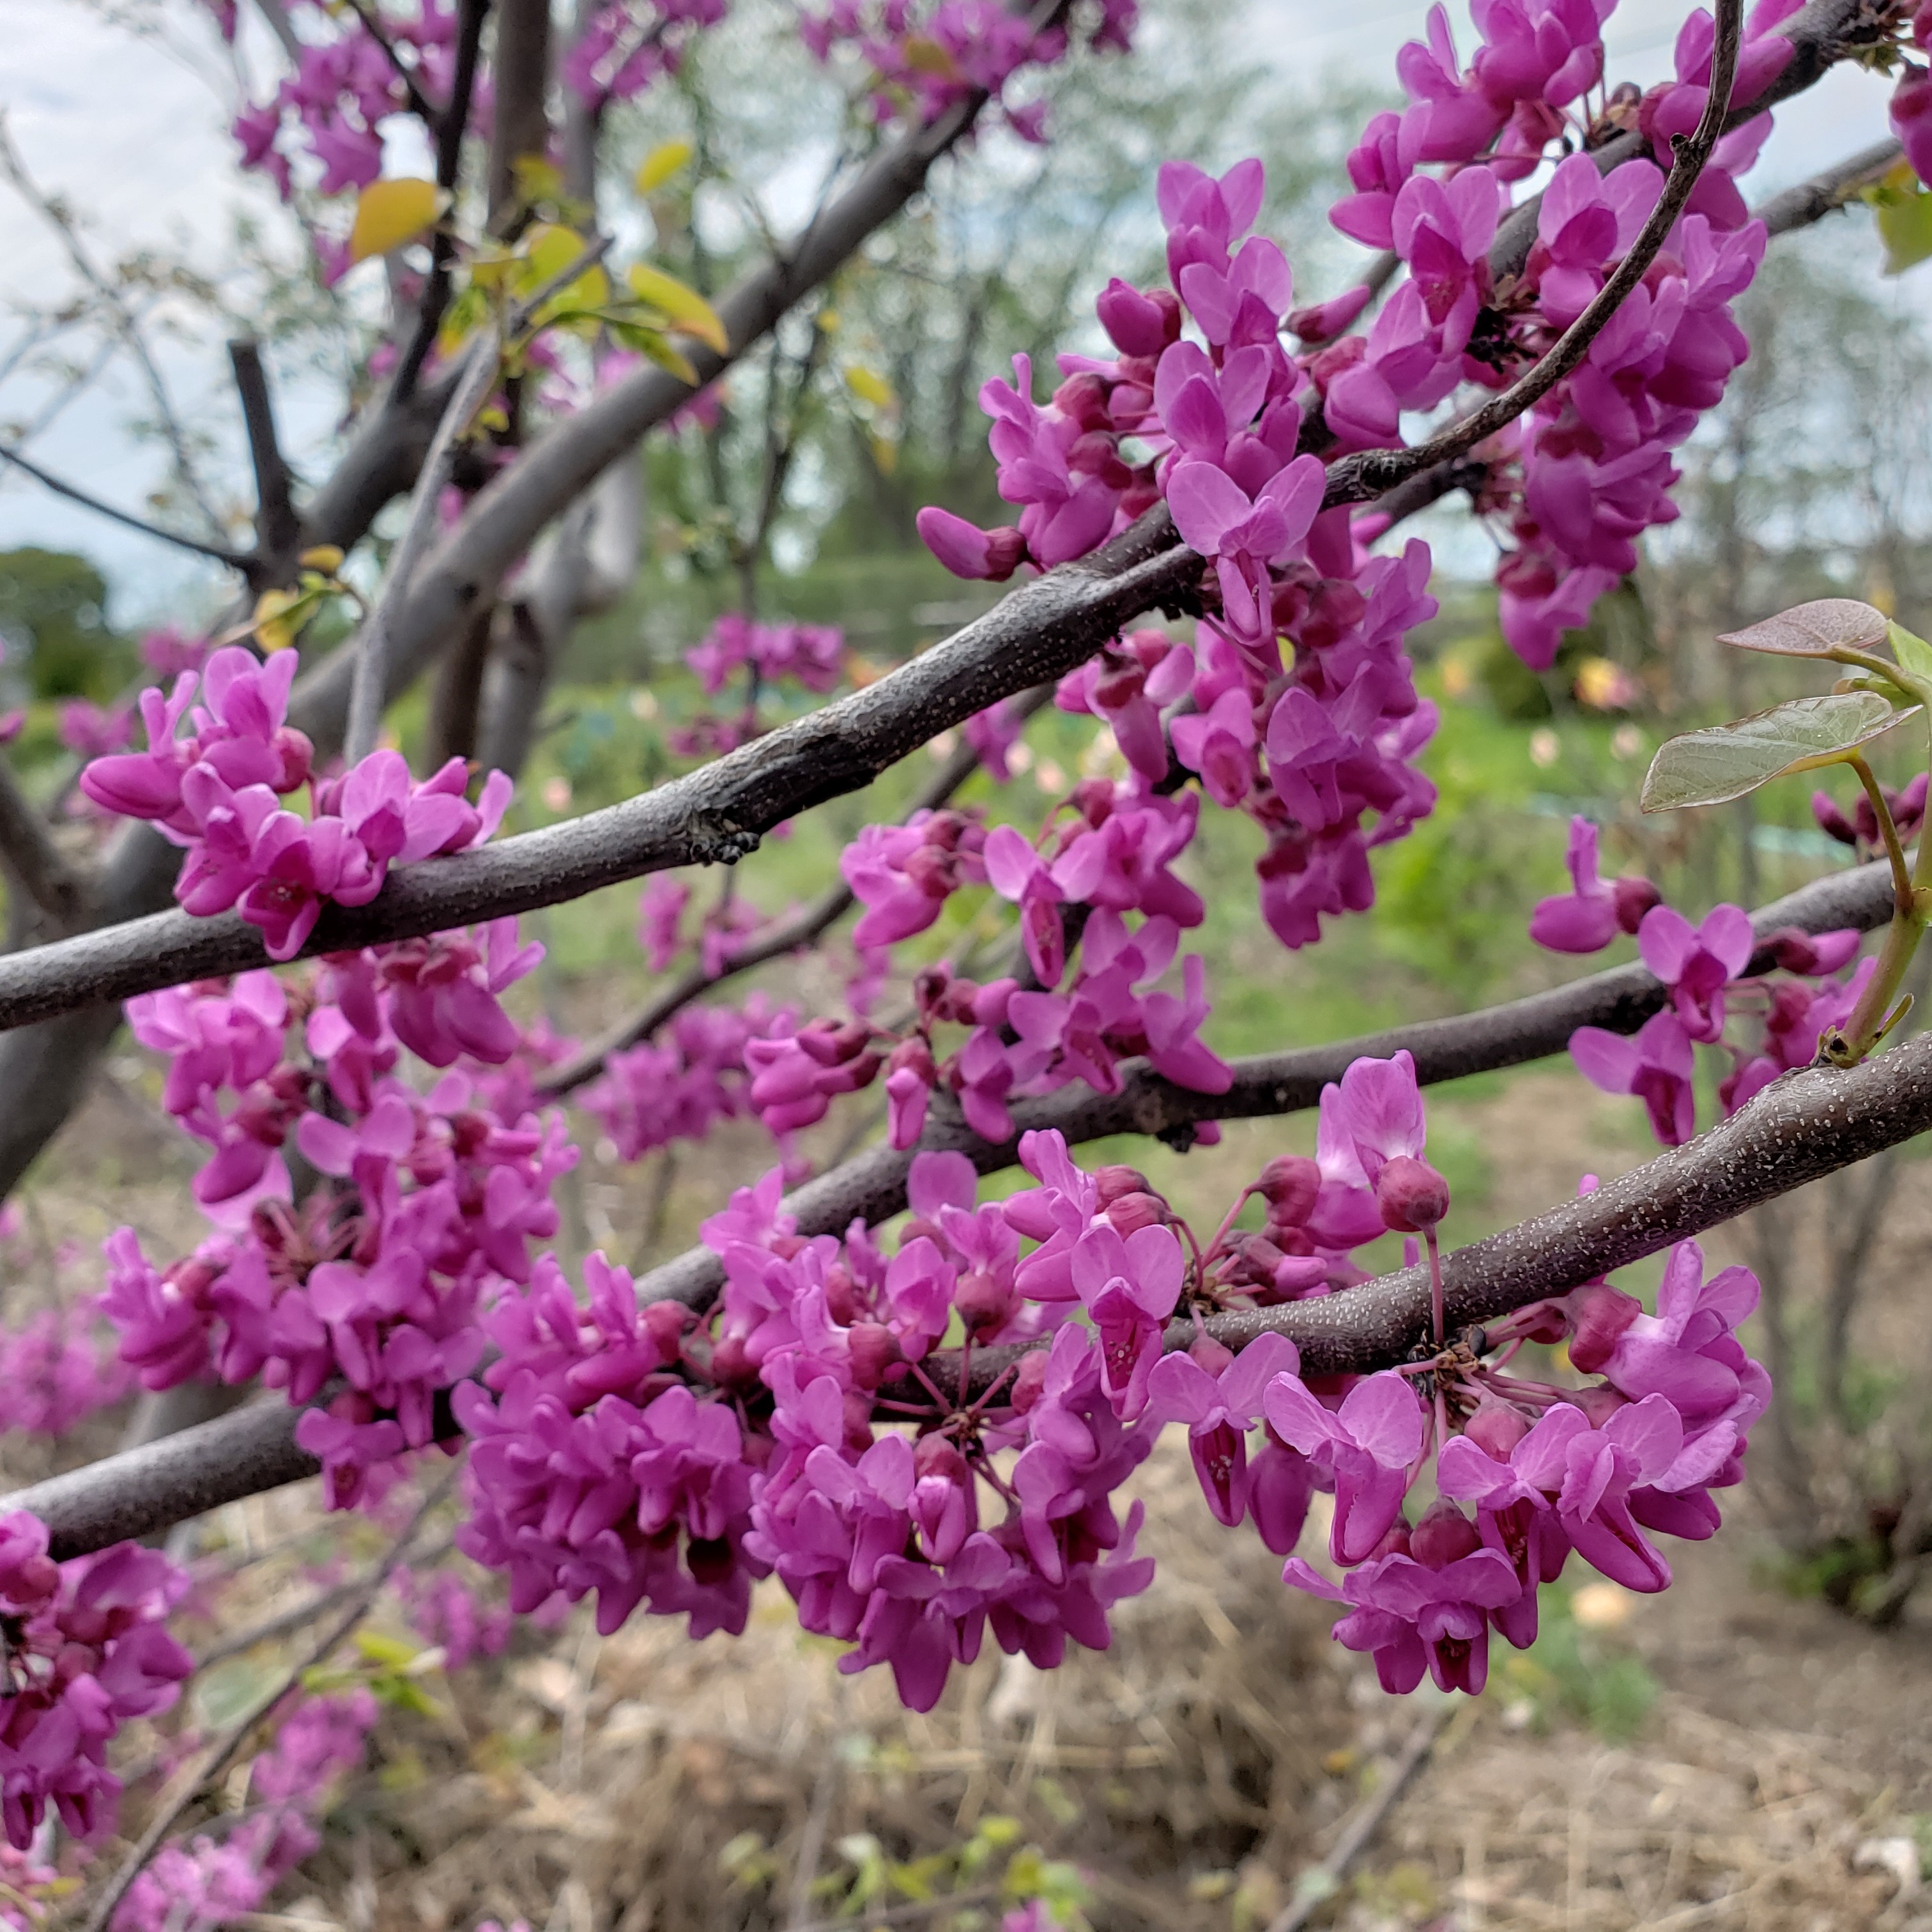 Fluffy neon purple flowers on Lucious Lavender redbud.